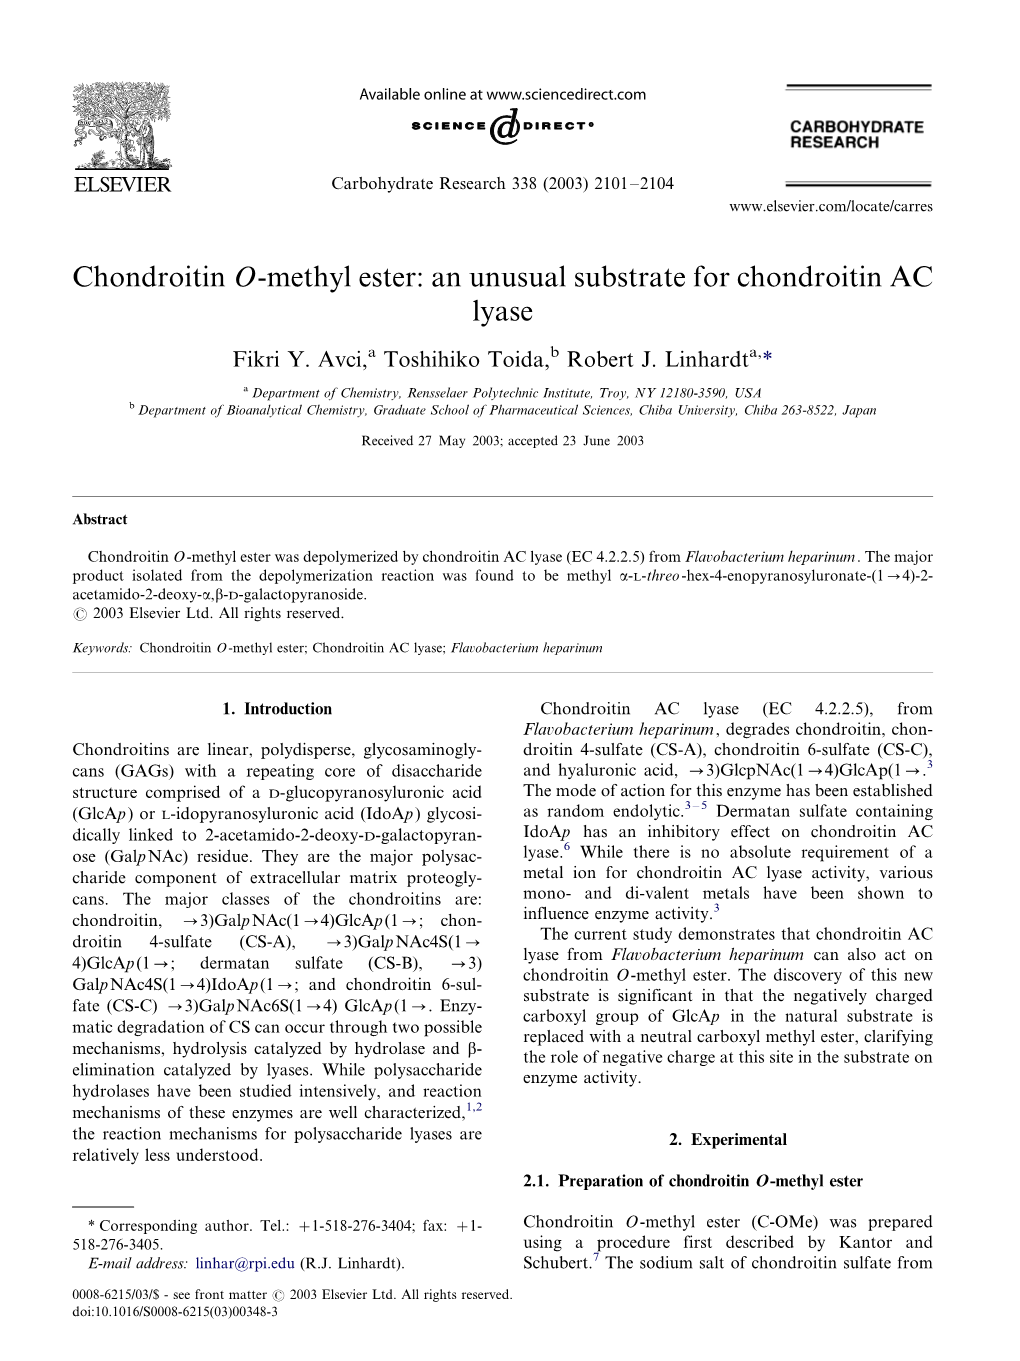 An Unusual Substrate for Chondroitin AC Lyase